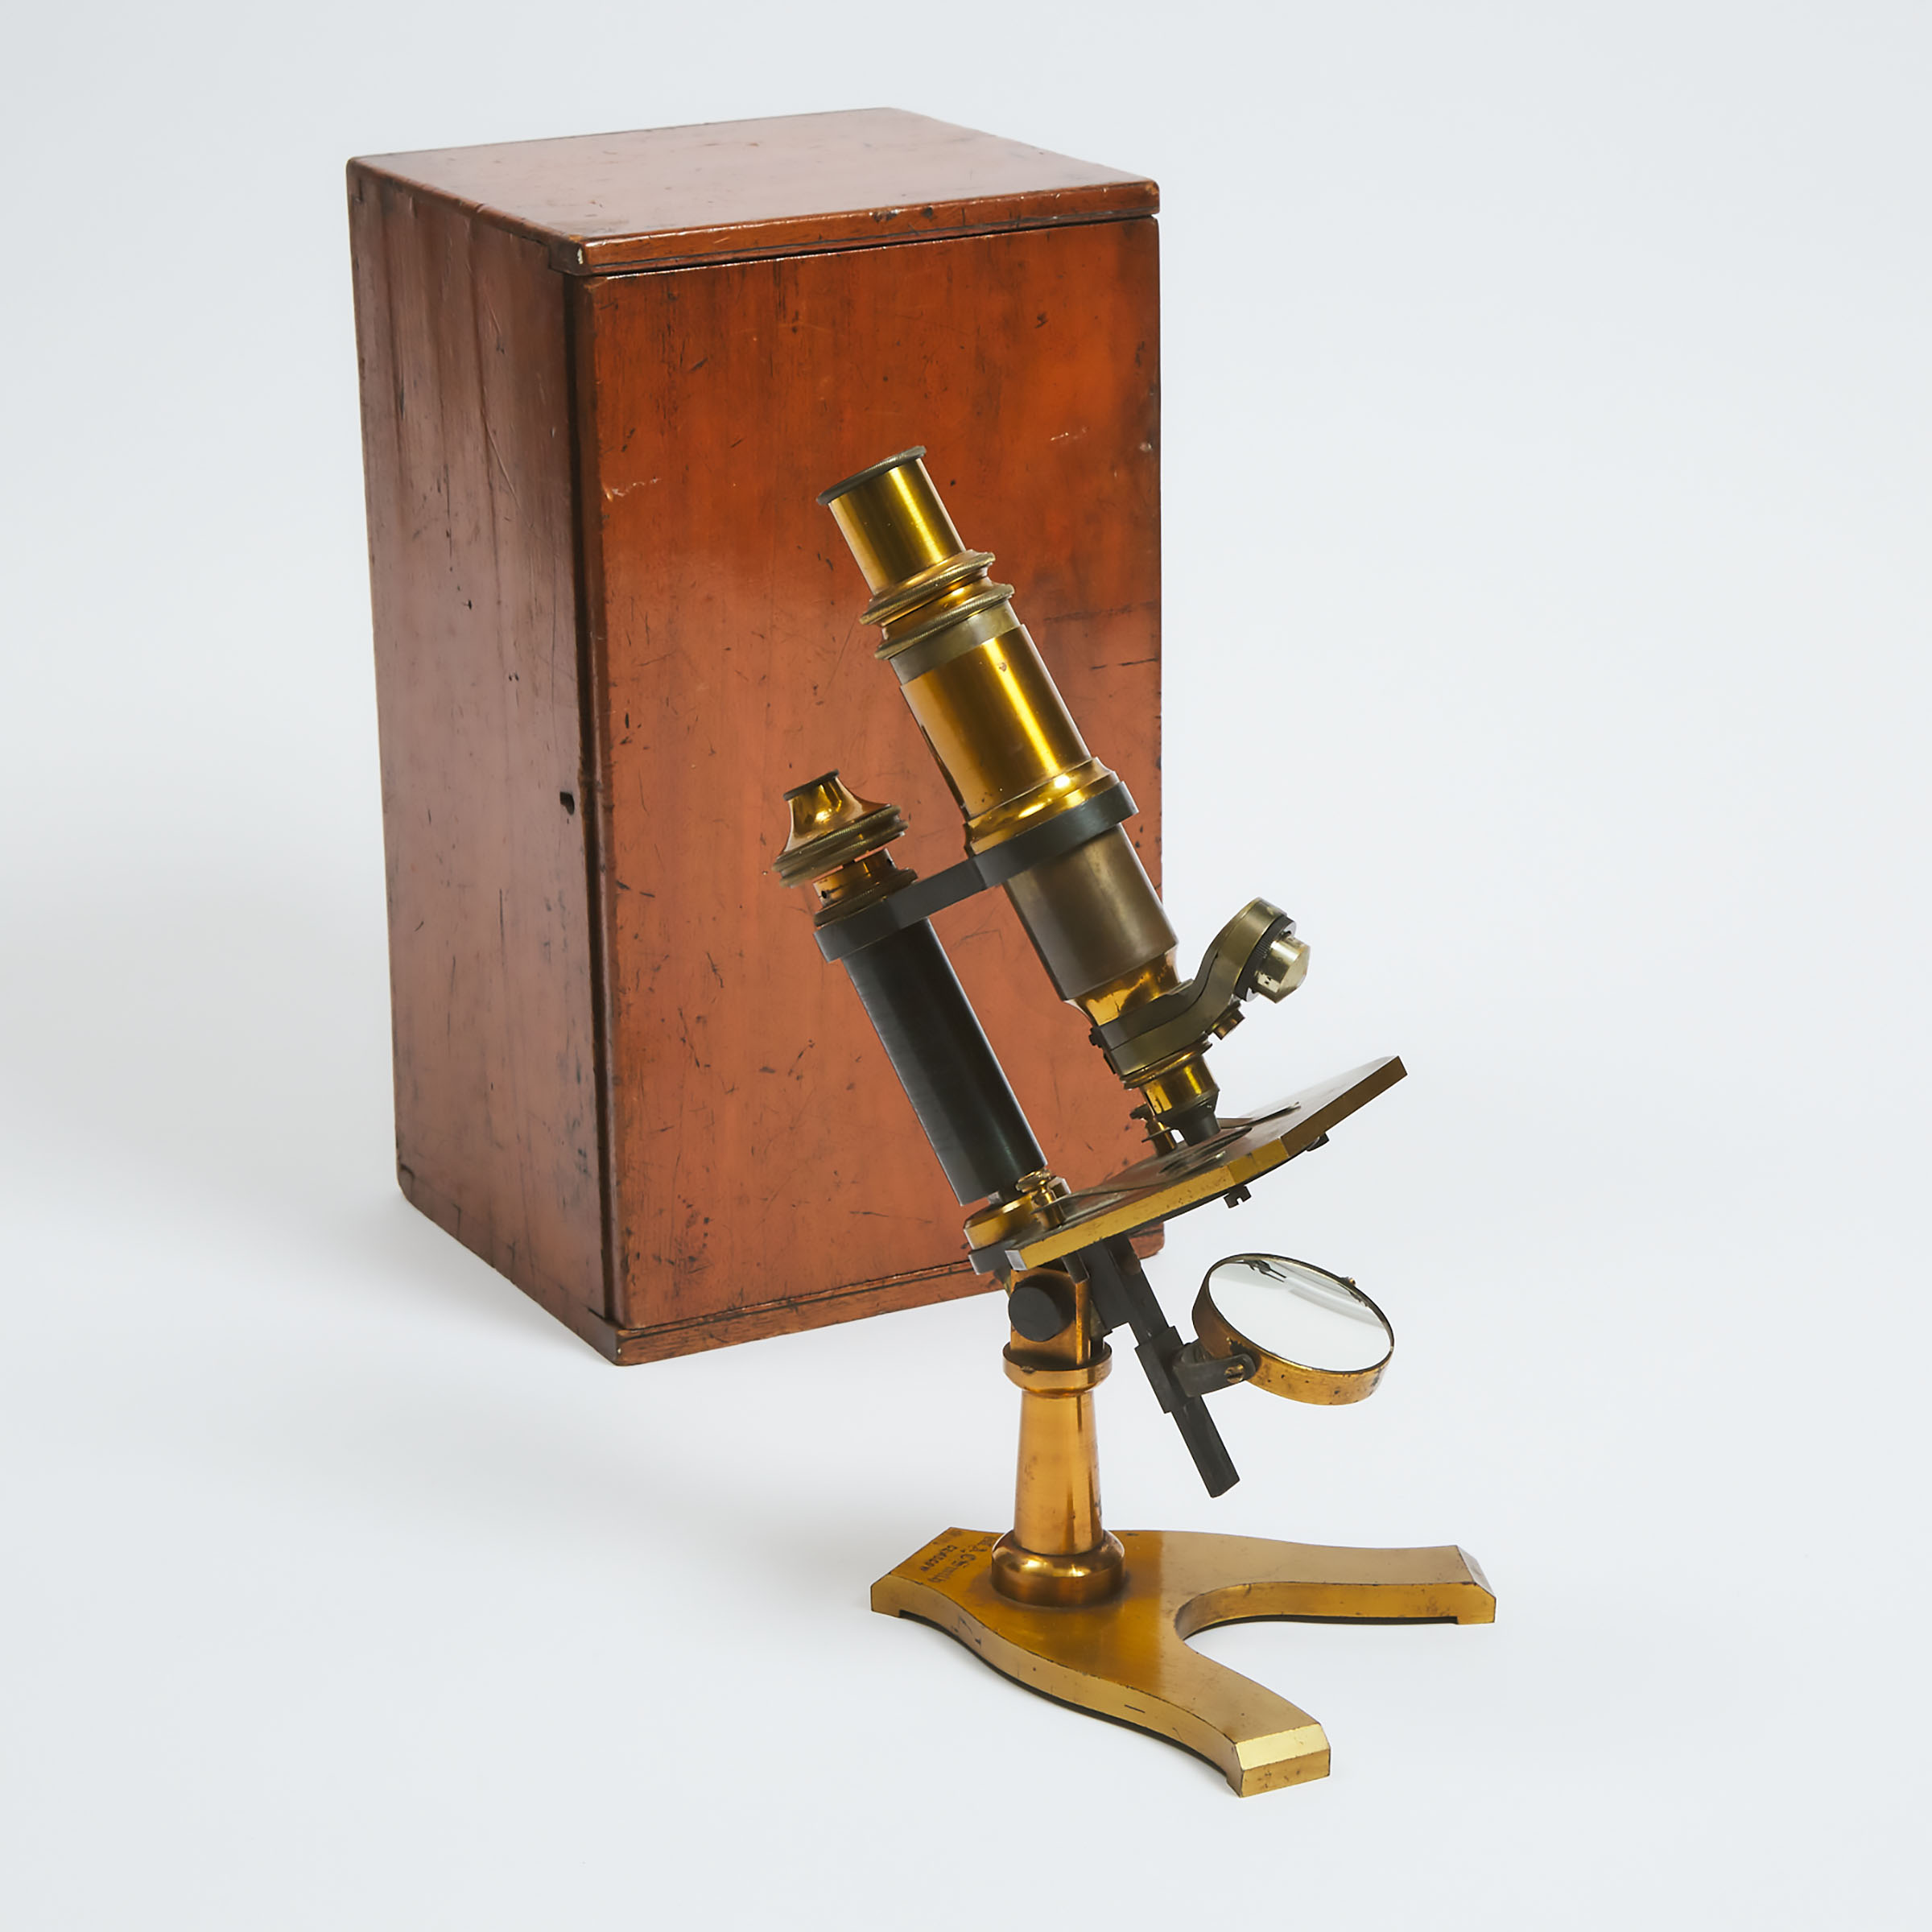 Scottish Lacquered and Black Oxidized Brass Compound Microscope, W.A.C. Smith, Glasgow, late 19th century